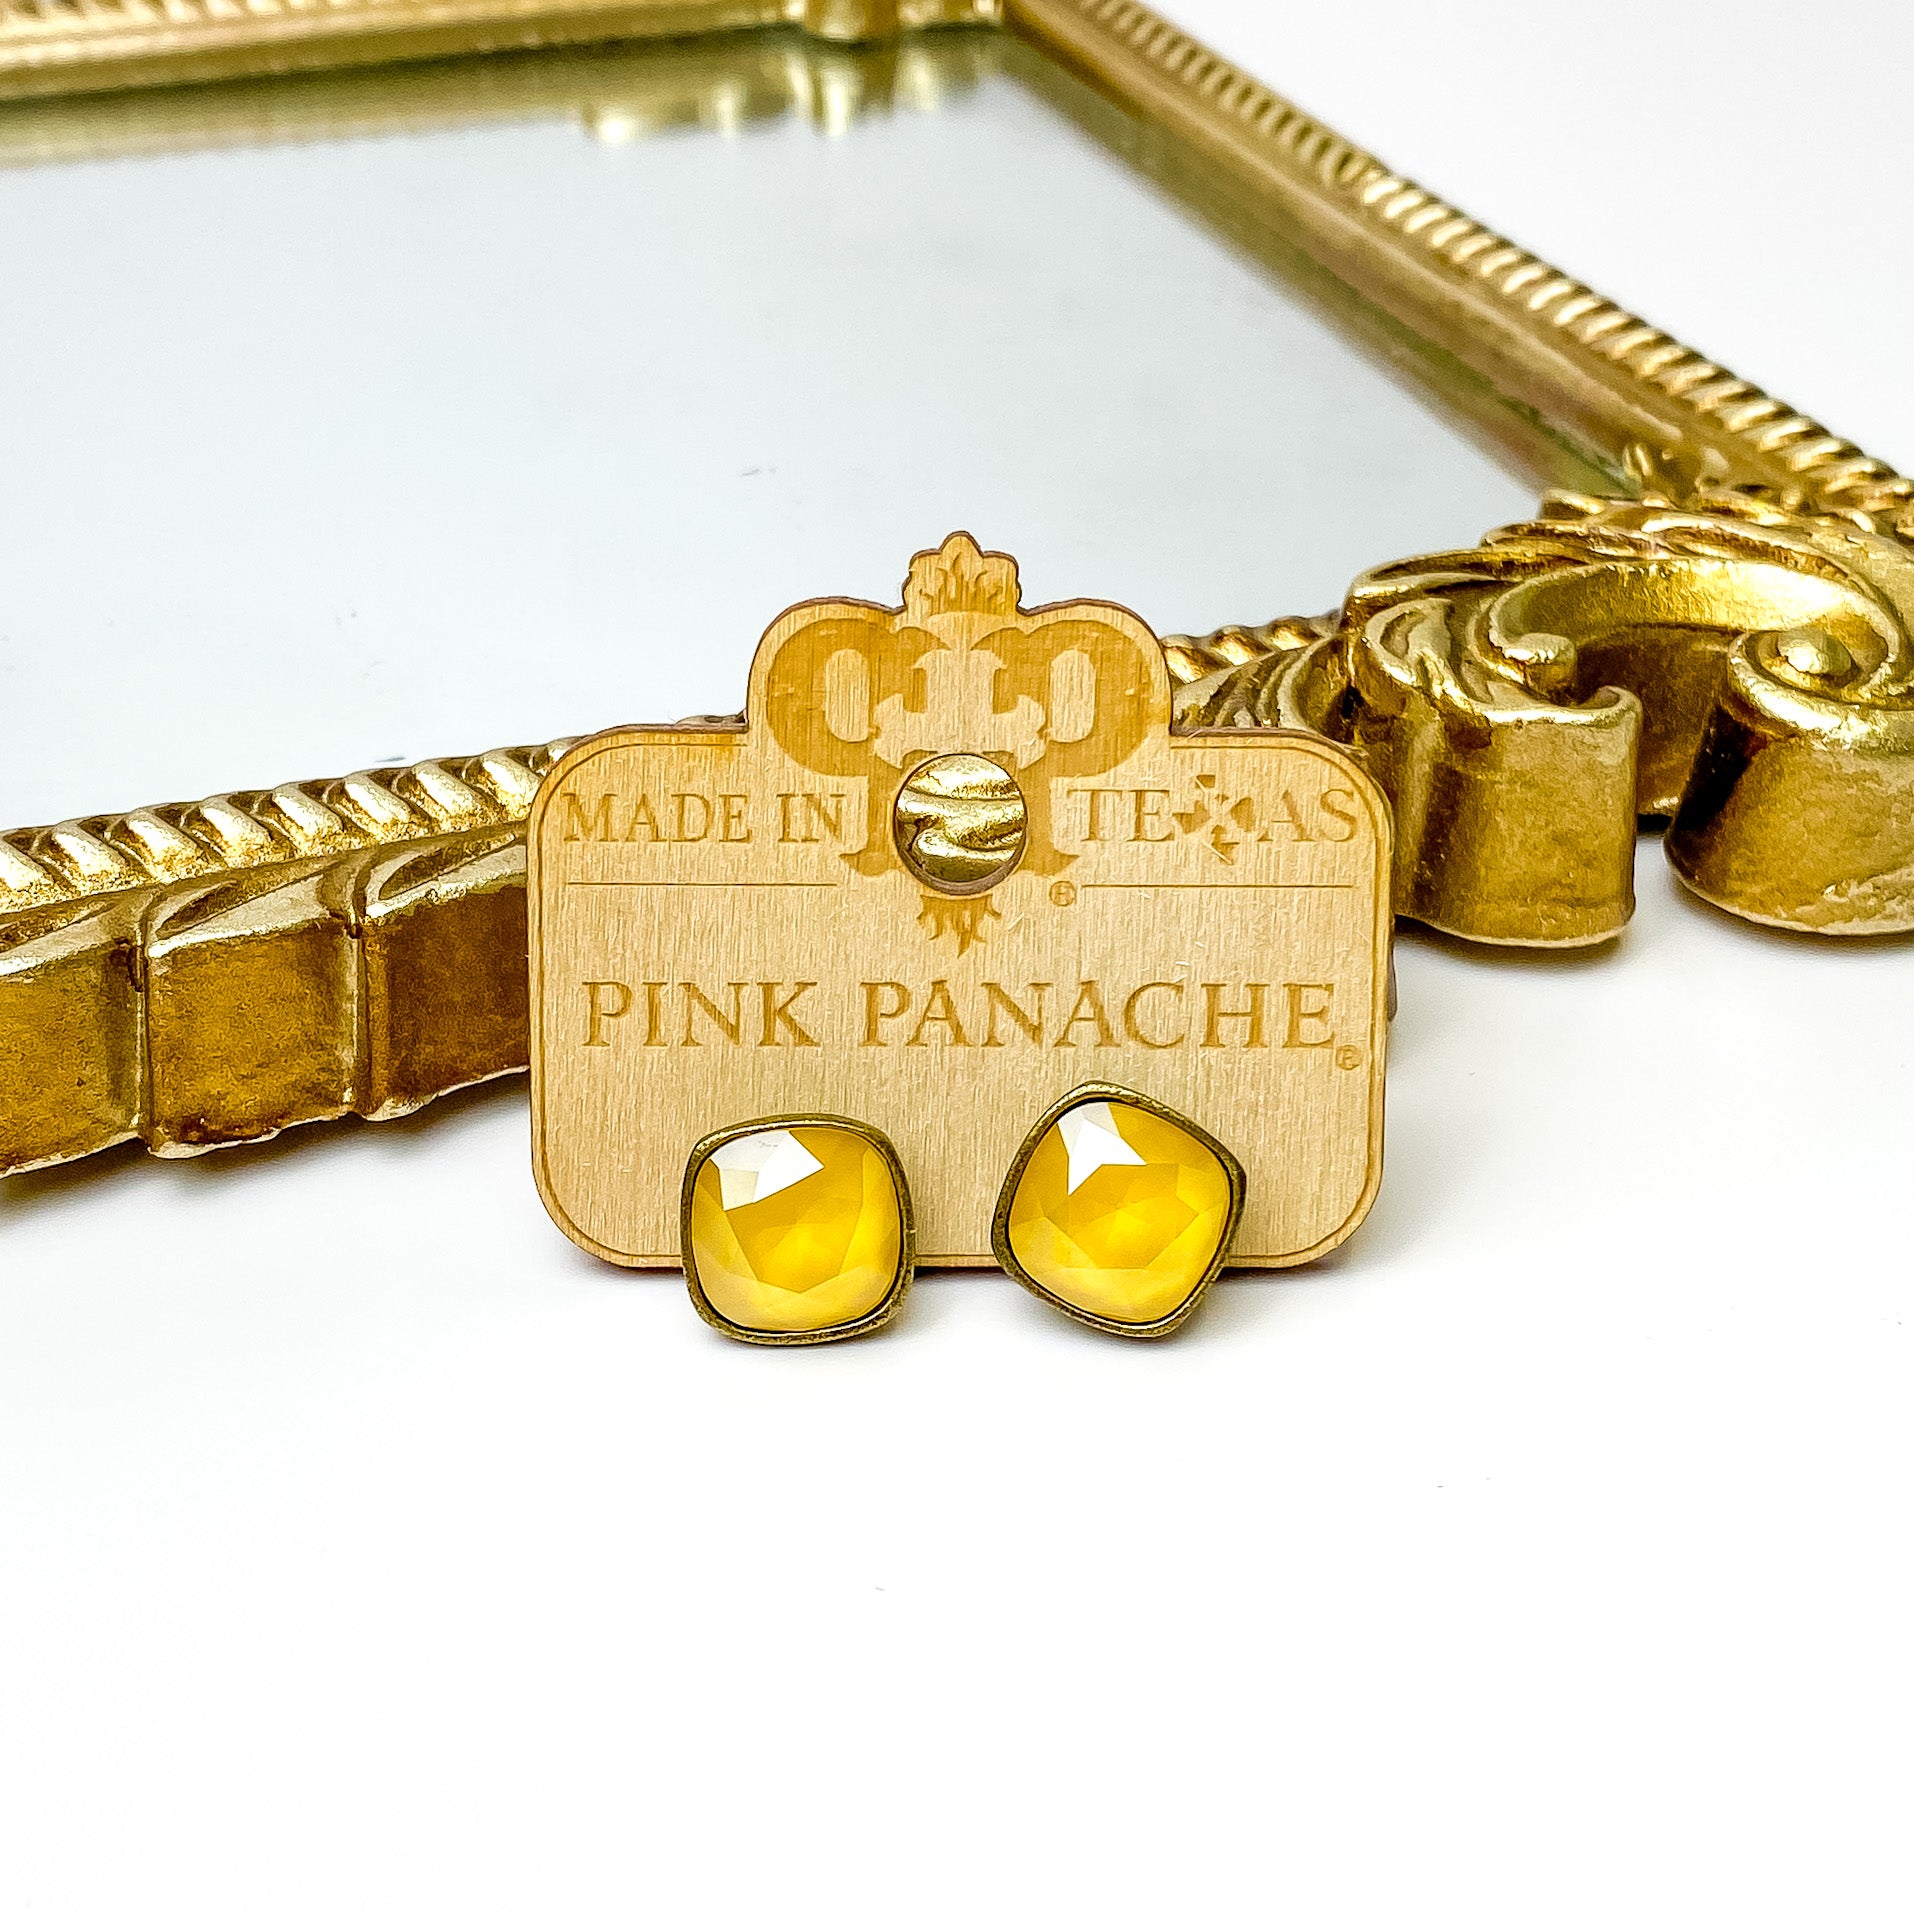 Yellow cushion cut crystal stud earrings with a bronze setting. These earrings are pictured on a Pink Panache wood holder in front of a gold mirror and on a white background.